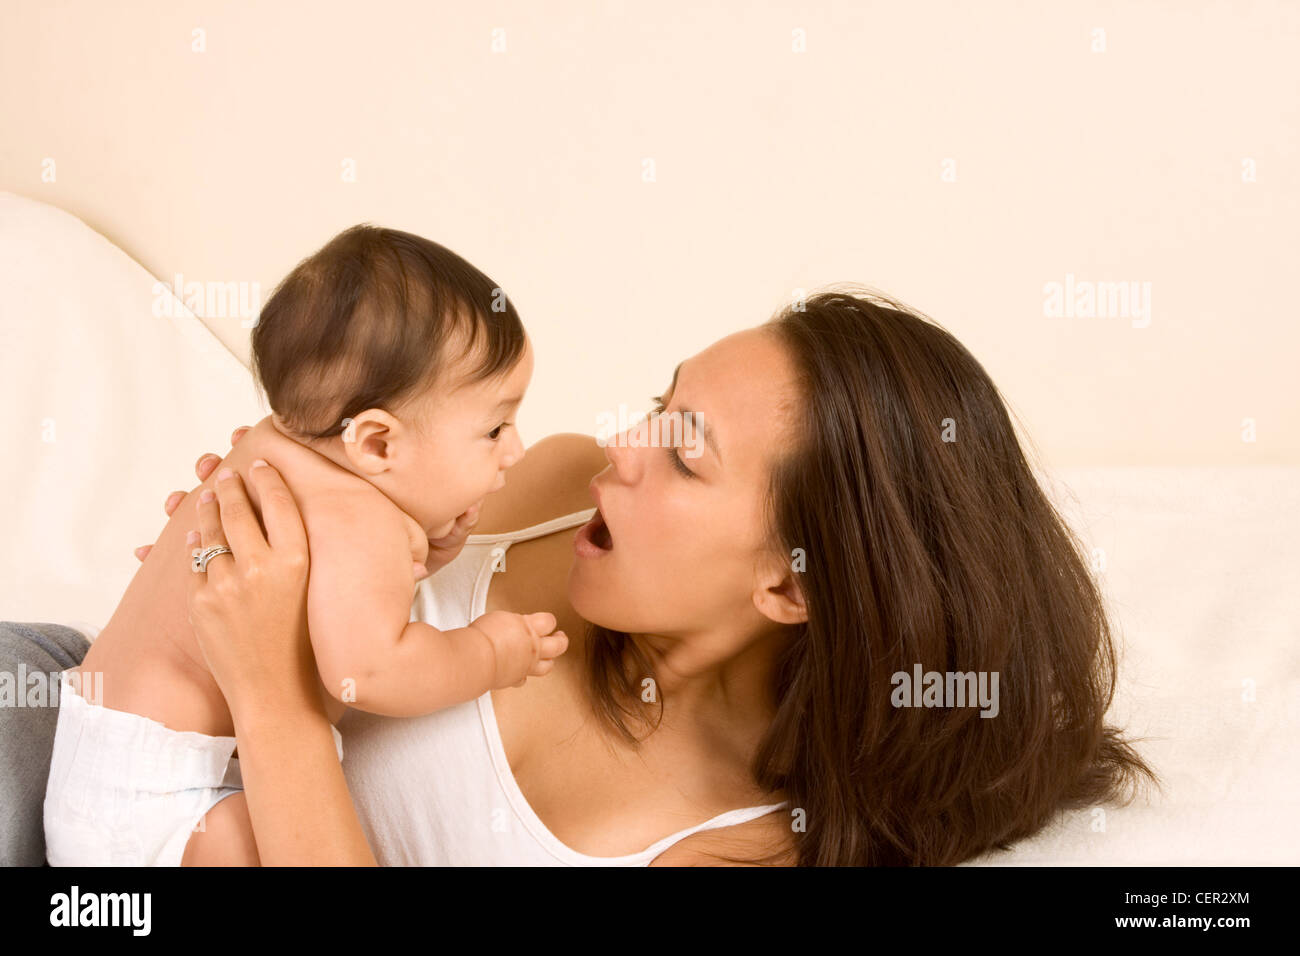 Mom and son on bed and mother embracing the infant baby playing with him Stock Photo